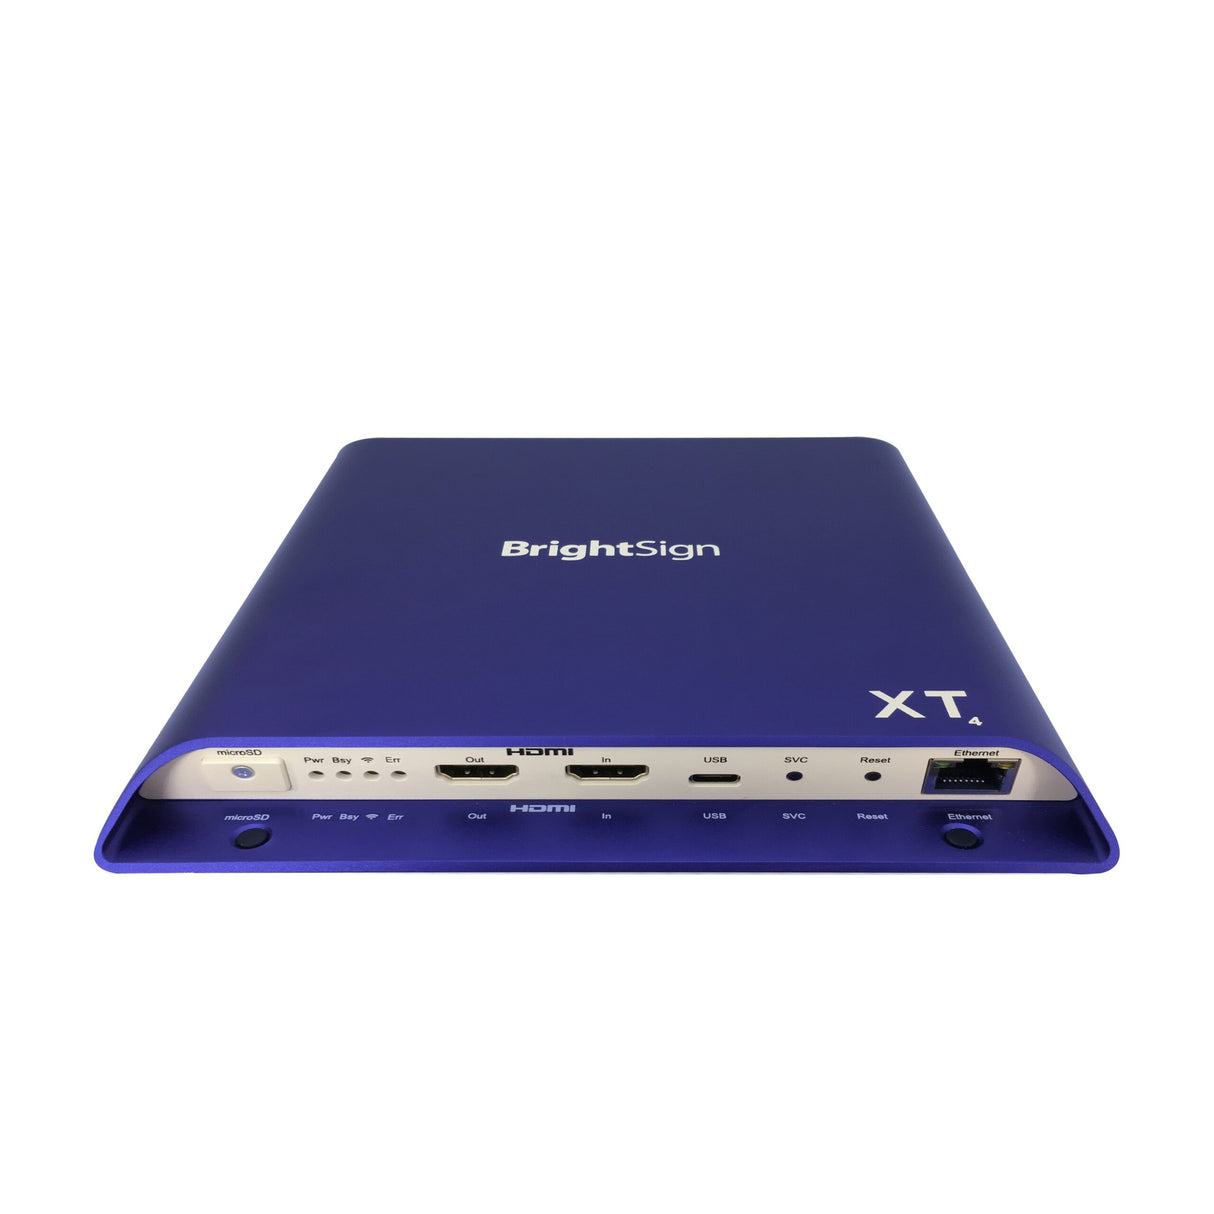 BrightSign XT1144-T Expanded I/O Player, TAA Approved